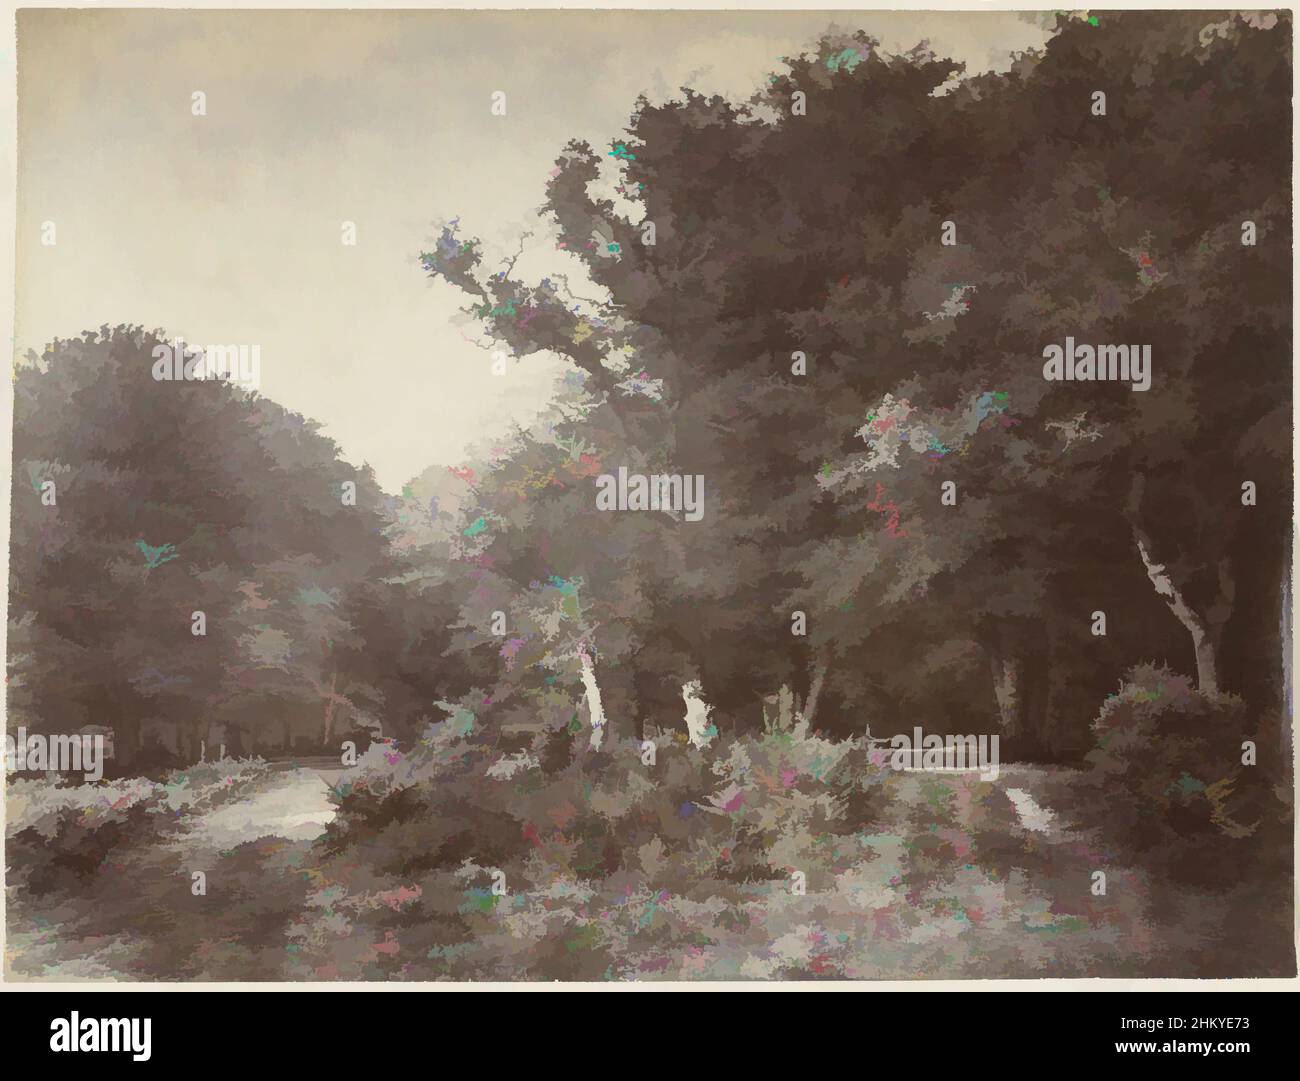 Art inspired by Forest landscape in Britain, John Golden Short, Great Britain, 1855 - 1890, paper, albumen print, height 152 mm × width 197 mm, Classic works modernized by Artotop with a splash of modernity. Shapes, color and value, eye-catching visual impact on art. Emotions through freedom of artworks in a contemporary way. A timeless message pursuing a wildly creative new direction. Artists turning to the digital medium and creating the Artotop NFT Stock Photo